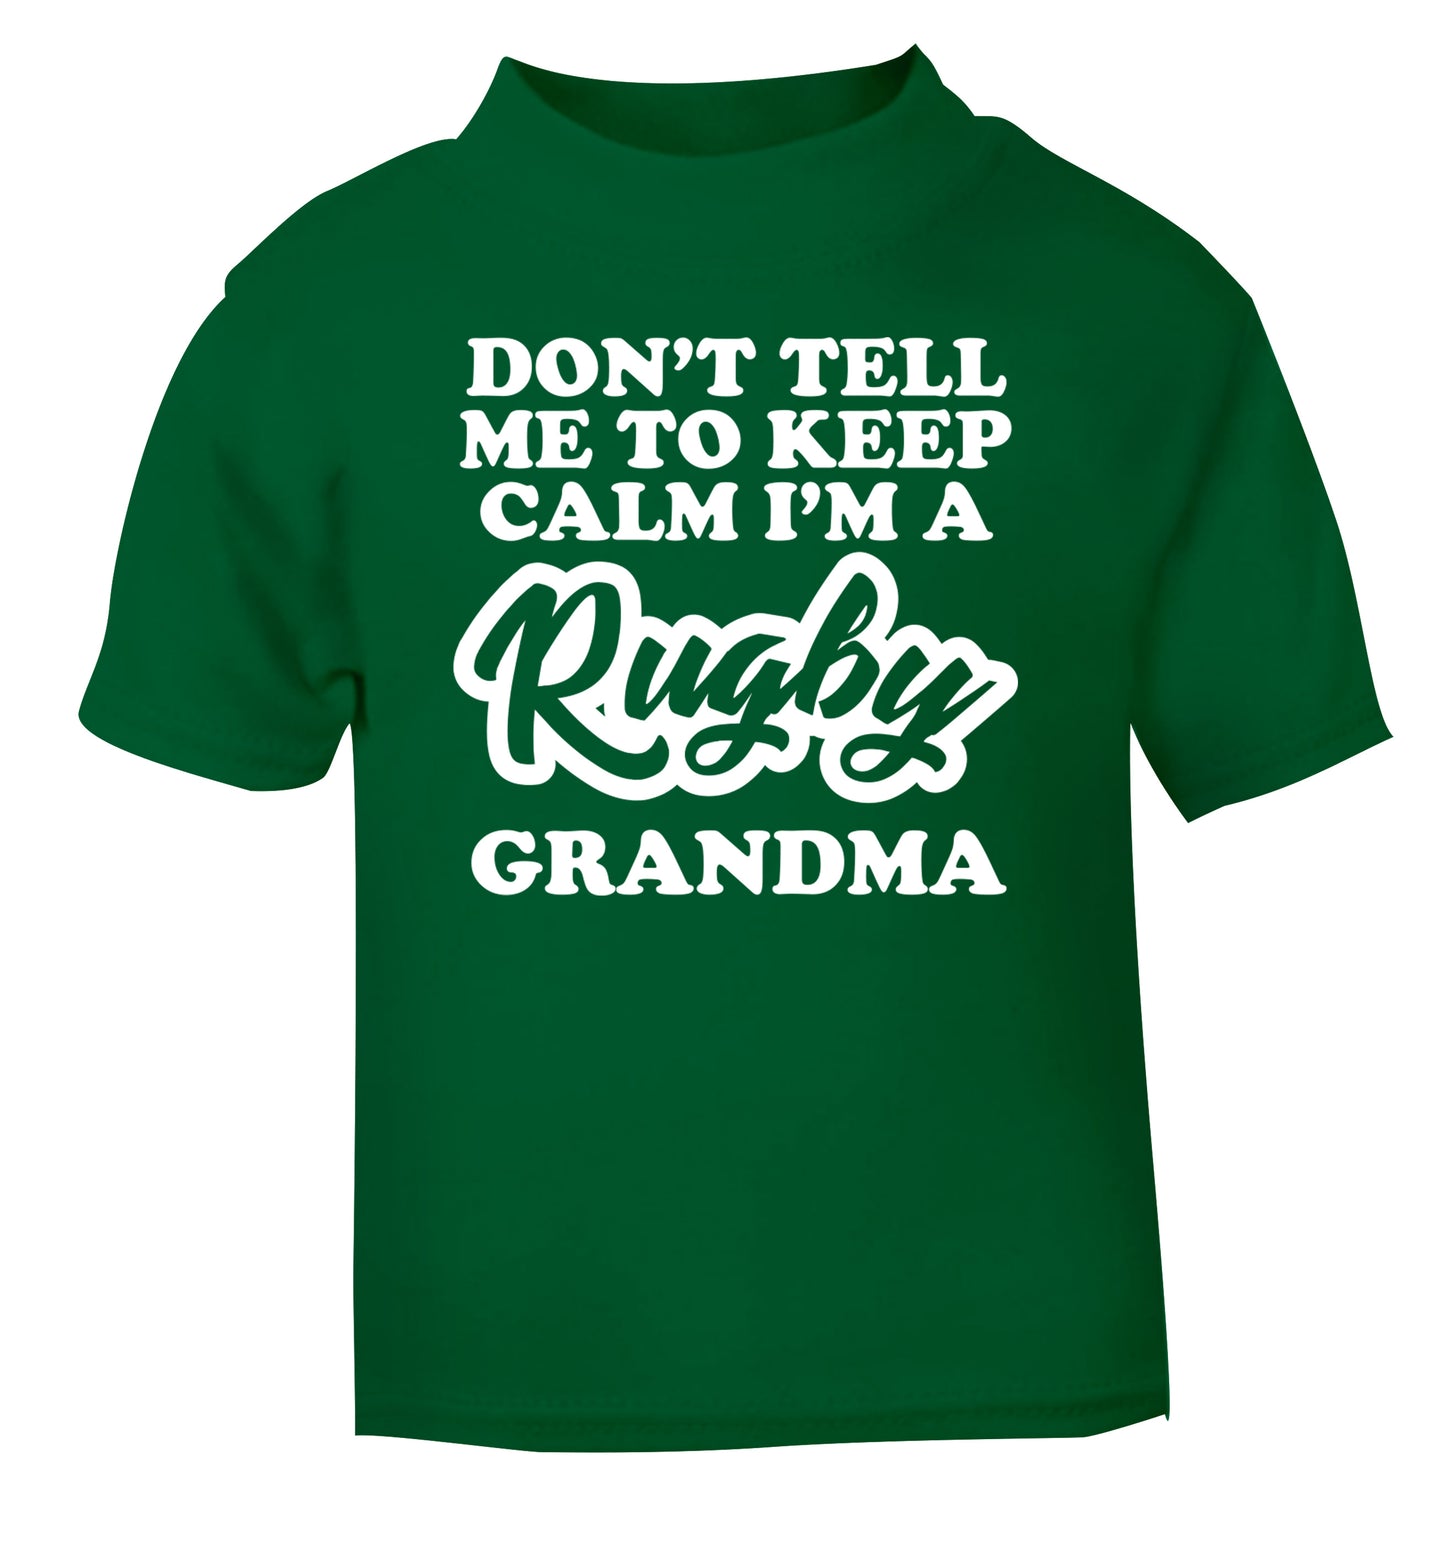 Don't tell me to keep calm I'm a rugby grandma green Baby Toddler Tshirt 2 Years